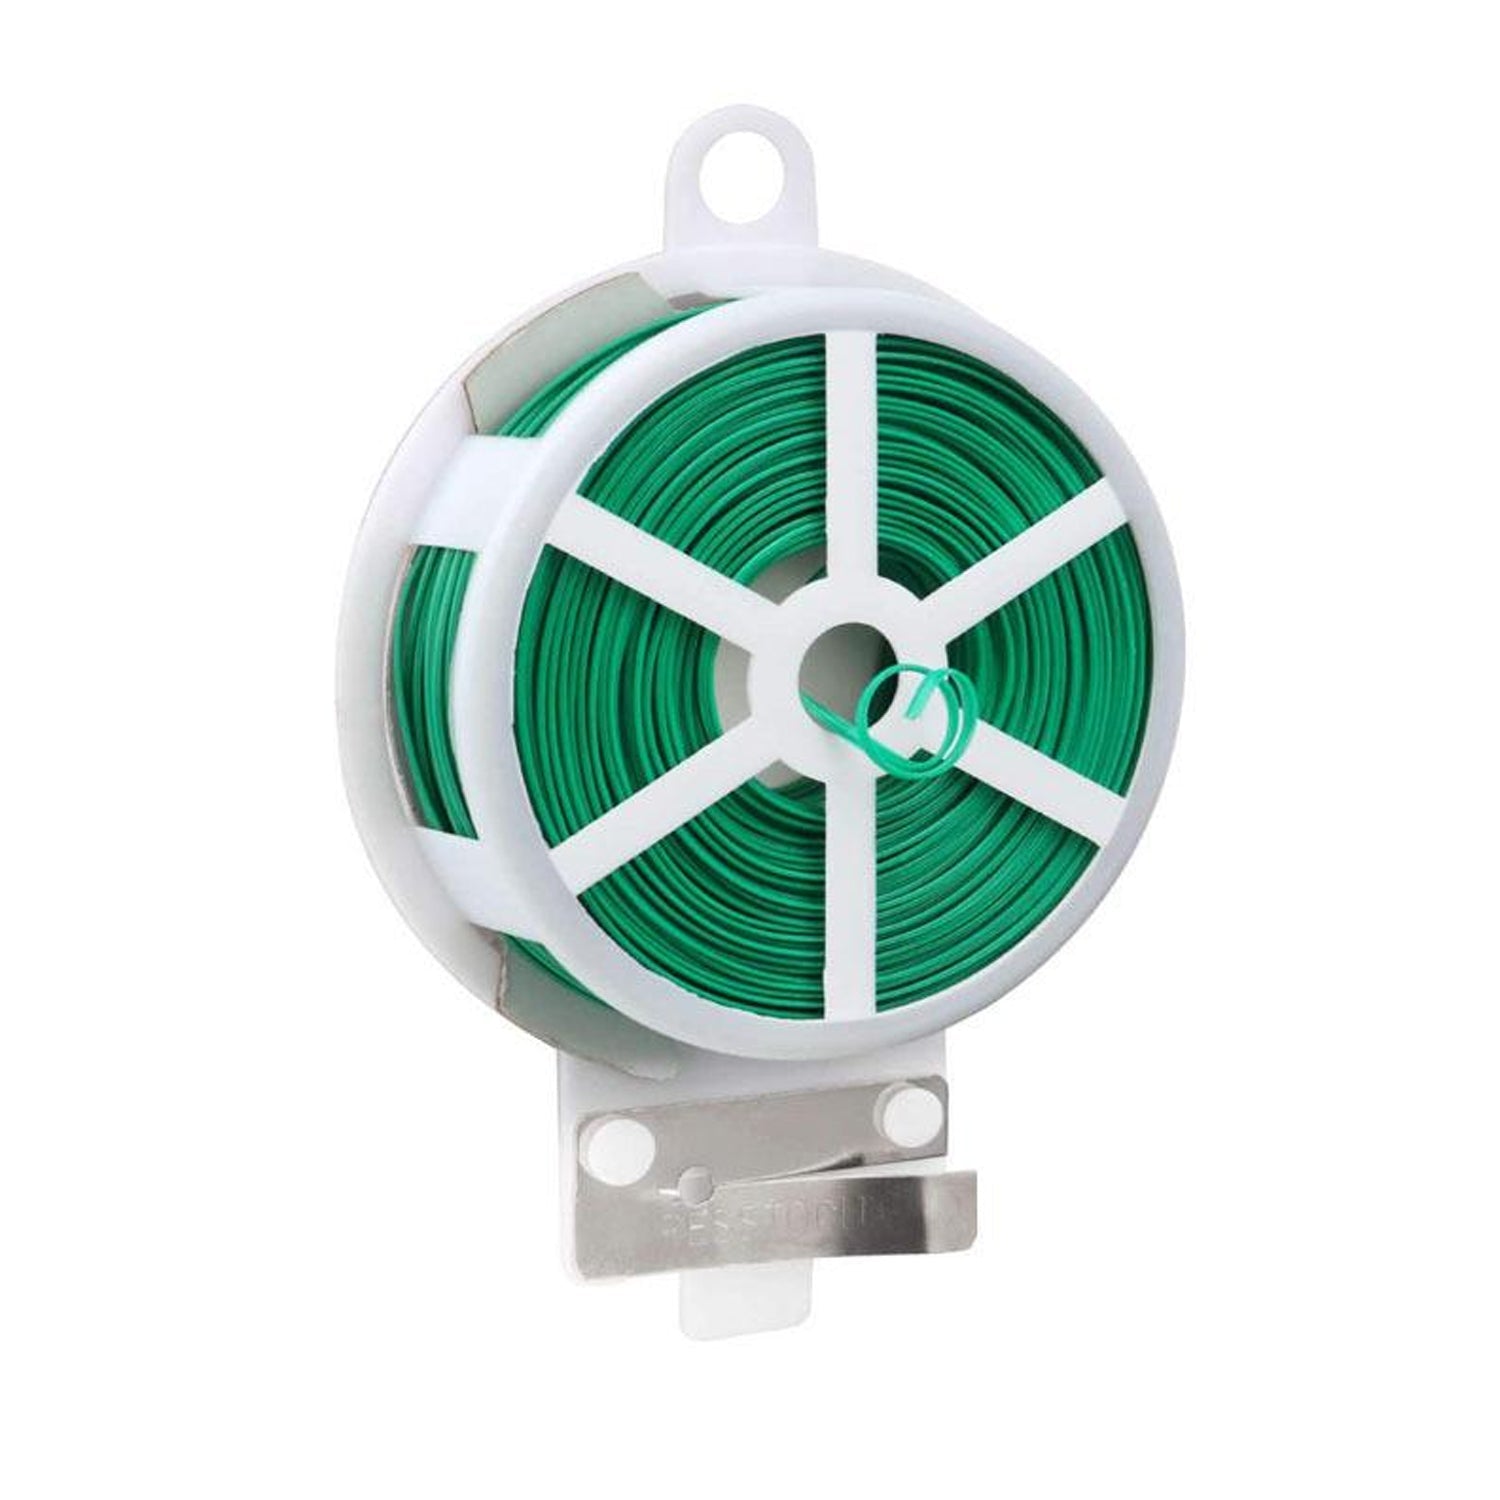 0873 Plastic Twist Tie Wire Spool With Cutter For Garden Yard Plant 50m (Green)